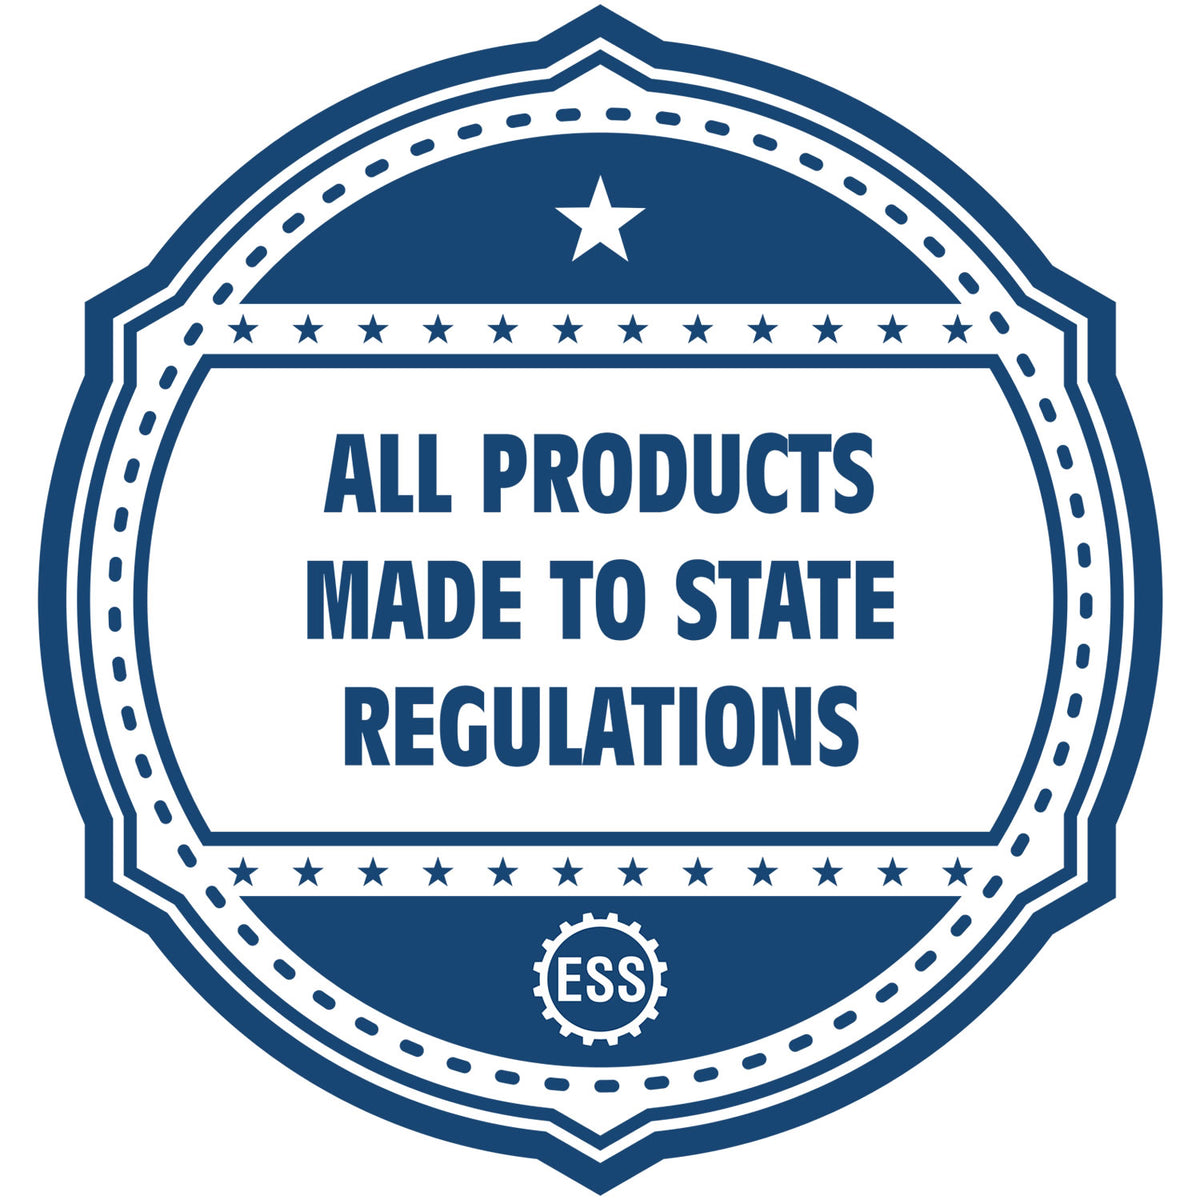 An icon or badge element for the Super Slim Idaho Notary Public Stamp showing that this product is made in compliance with state regulations.